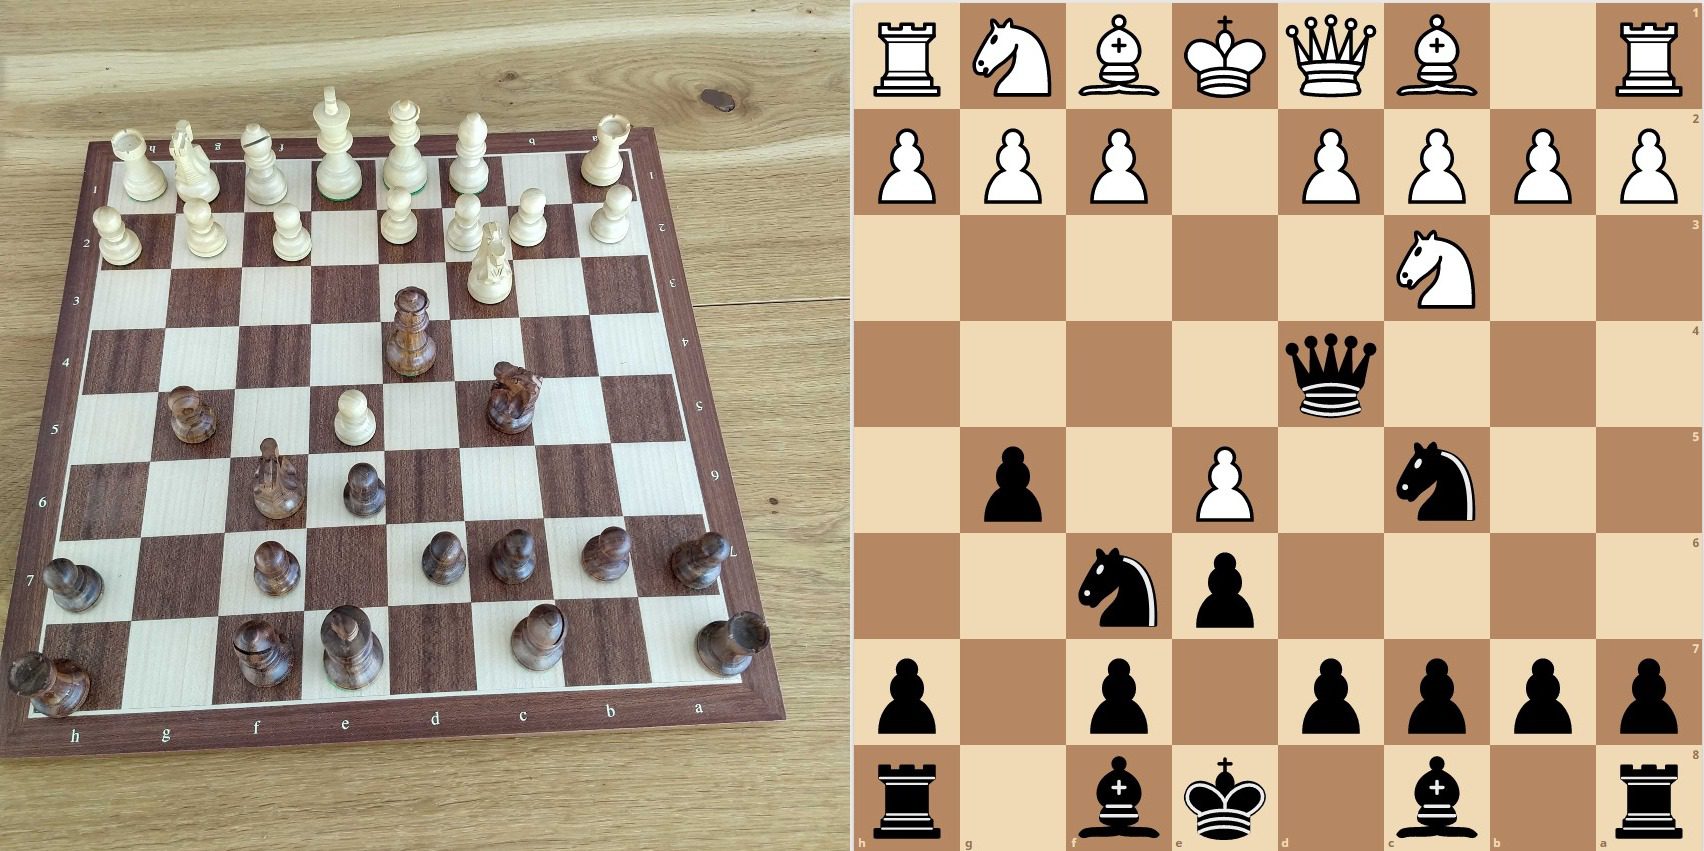 Blitz #chess games can be crazy stressful! Get your reps in with